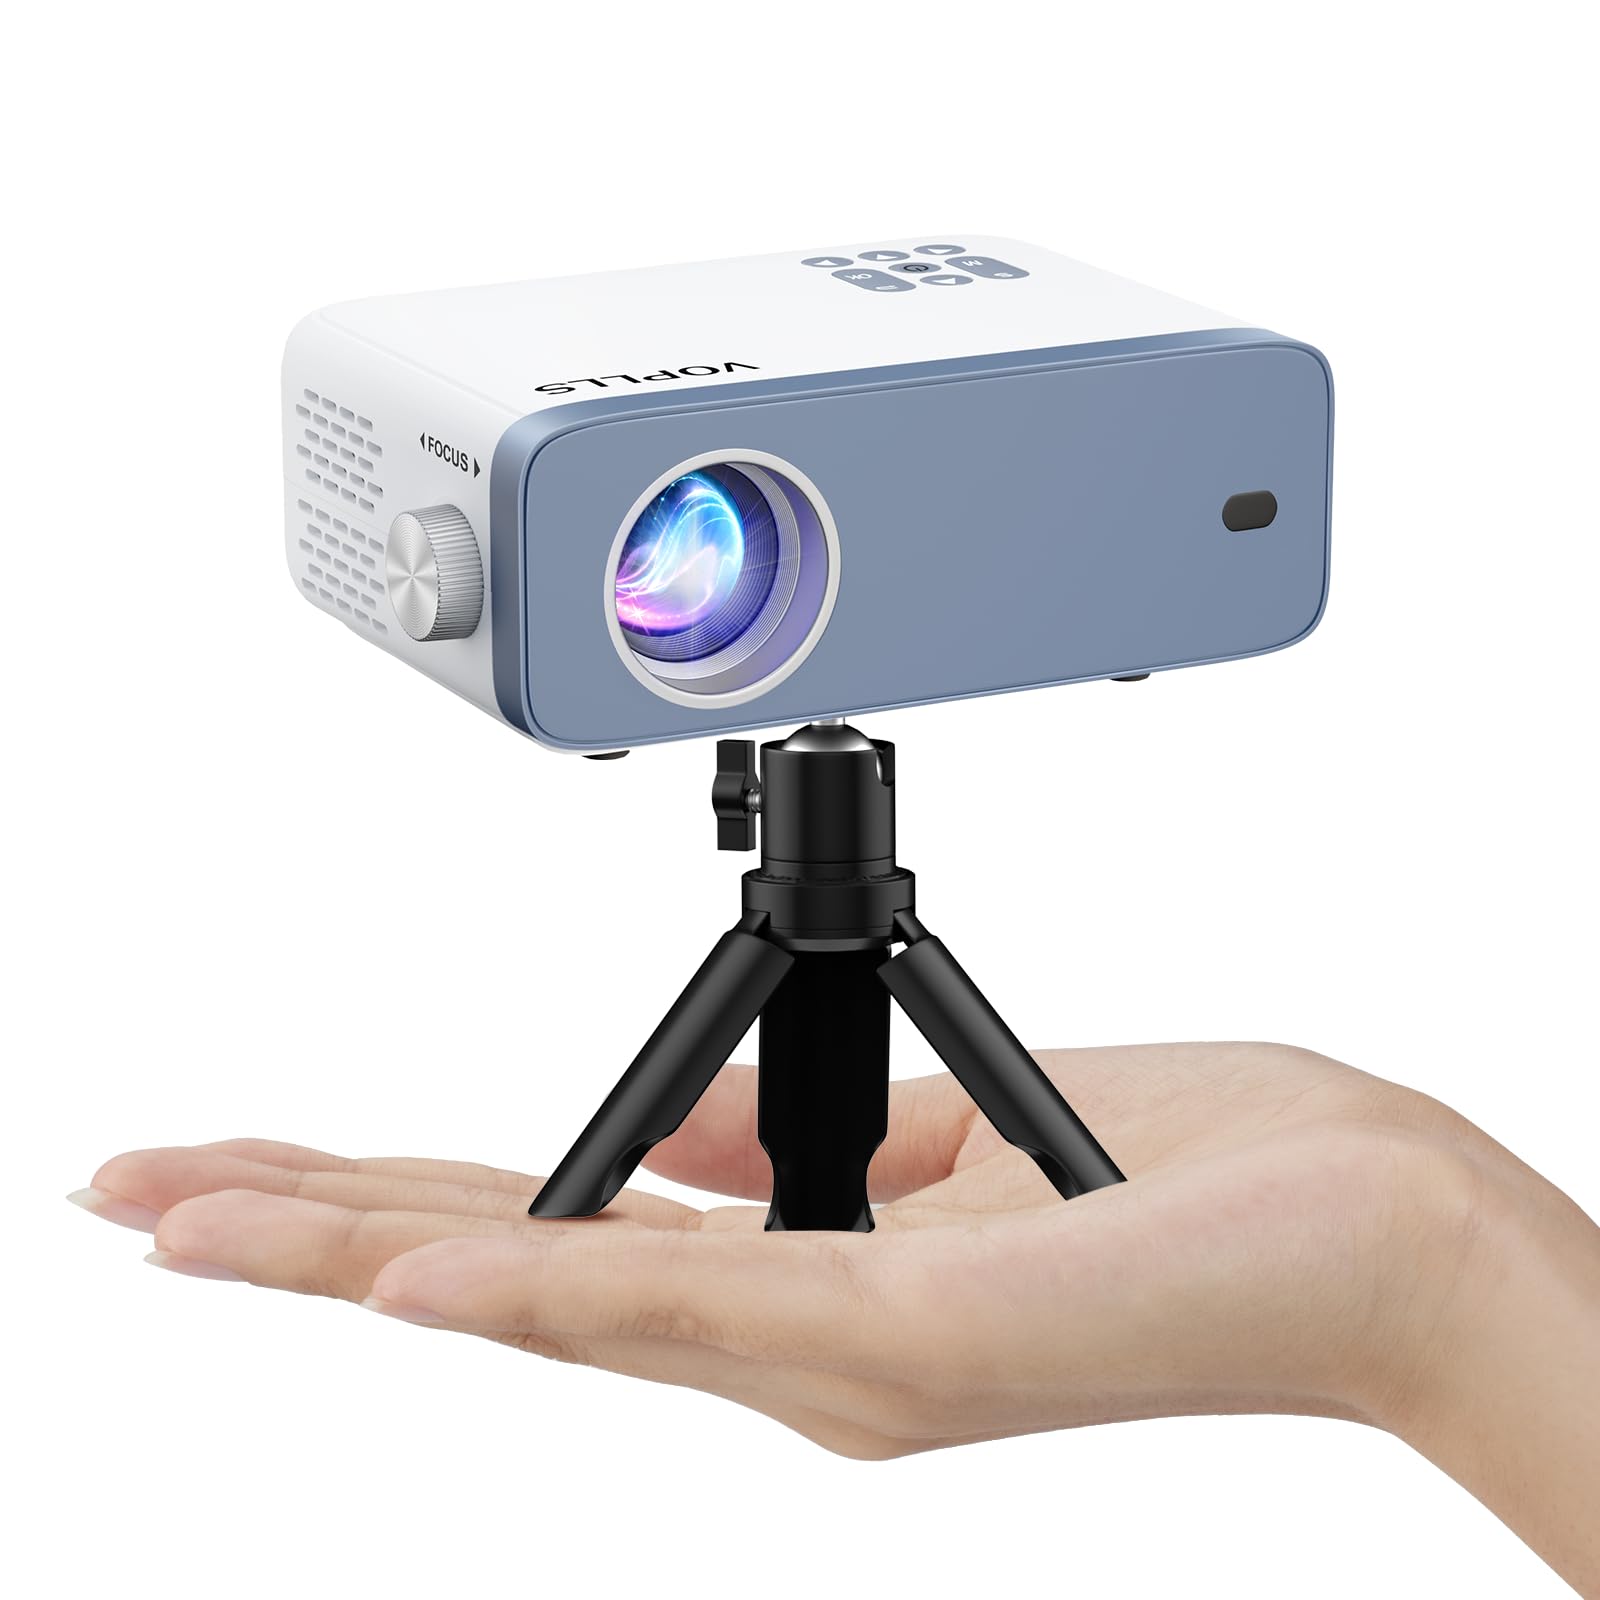 Mini Projector, VOPLLS 1080P Full HD Supported Video Projector, Portable Outdoor Home Theater Movie Projector, 50% Zoom, Compatible with HDMI, USB, AV, Smartphone/Tablet/Laptop/PC/TV Box